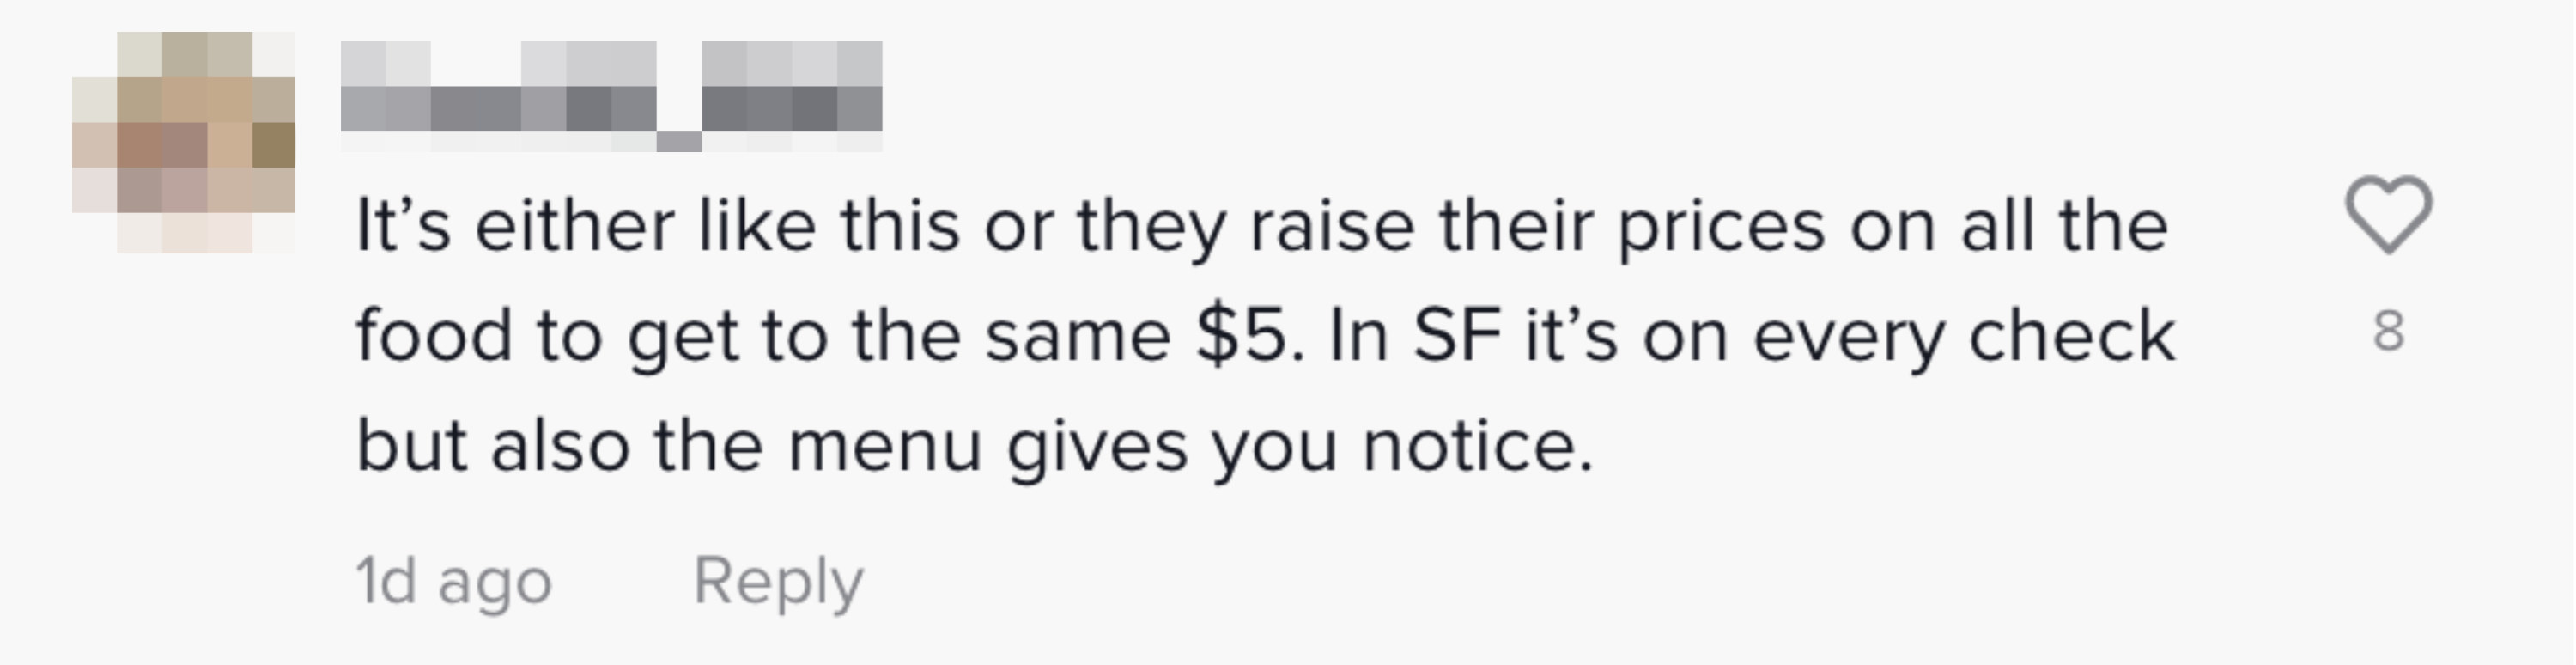 It&#x27;s either like this or they raise their prices on all the food to get the same $5; in San Francisco it&#x27;s on every check but the menu gives you notice